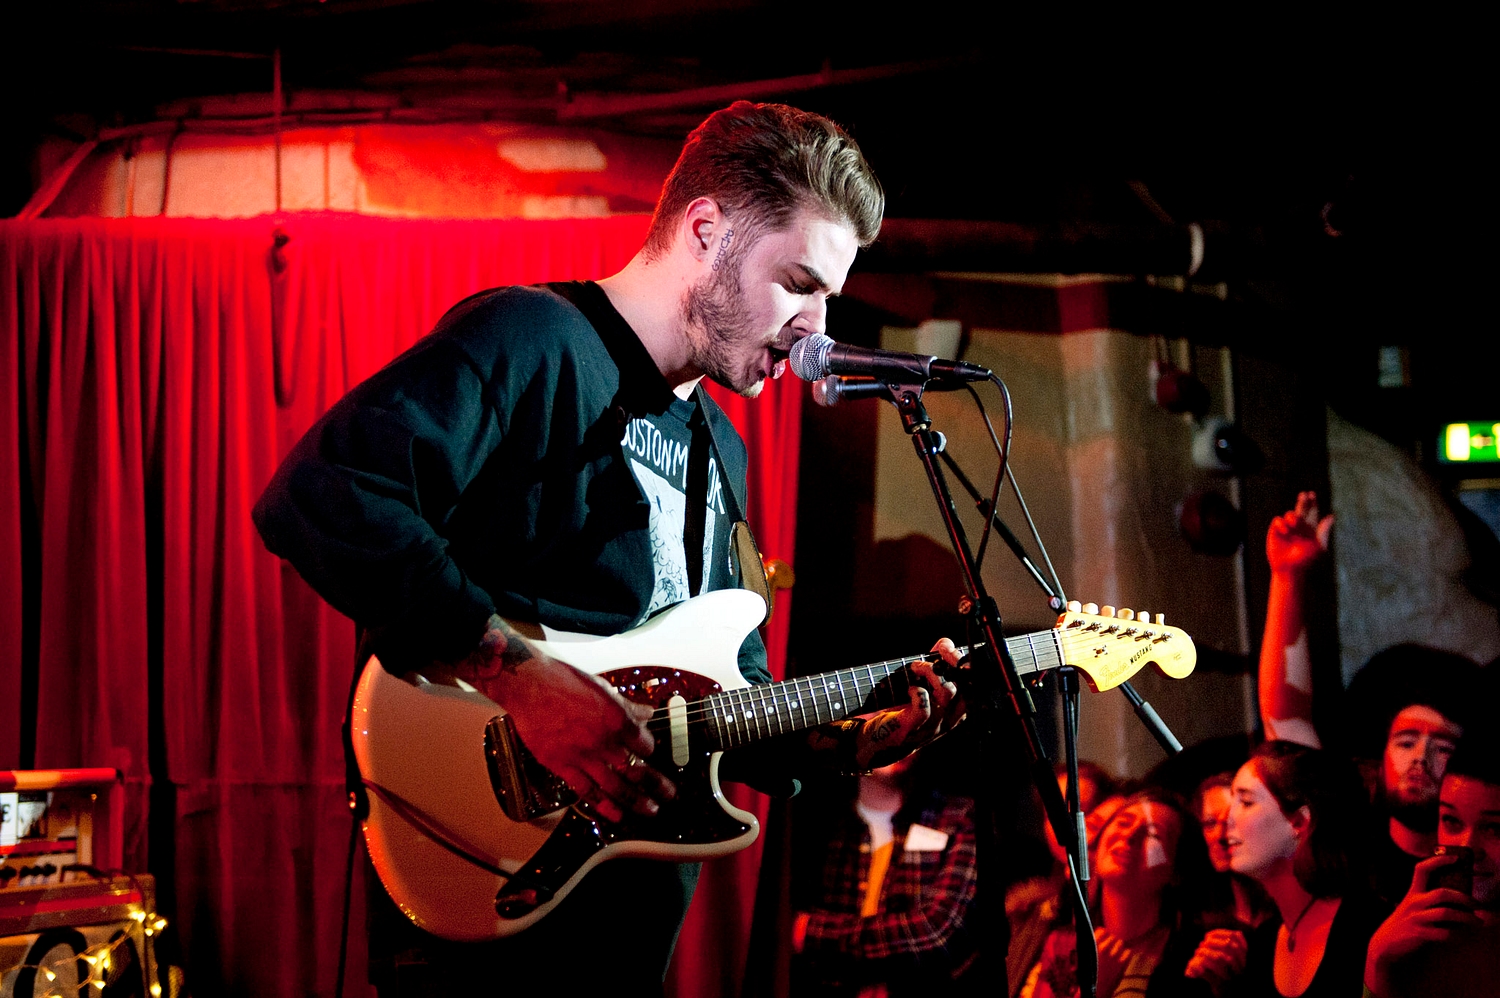 Moose Blood talk album two: “We went in real hard on this one"